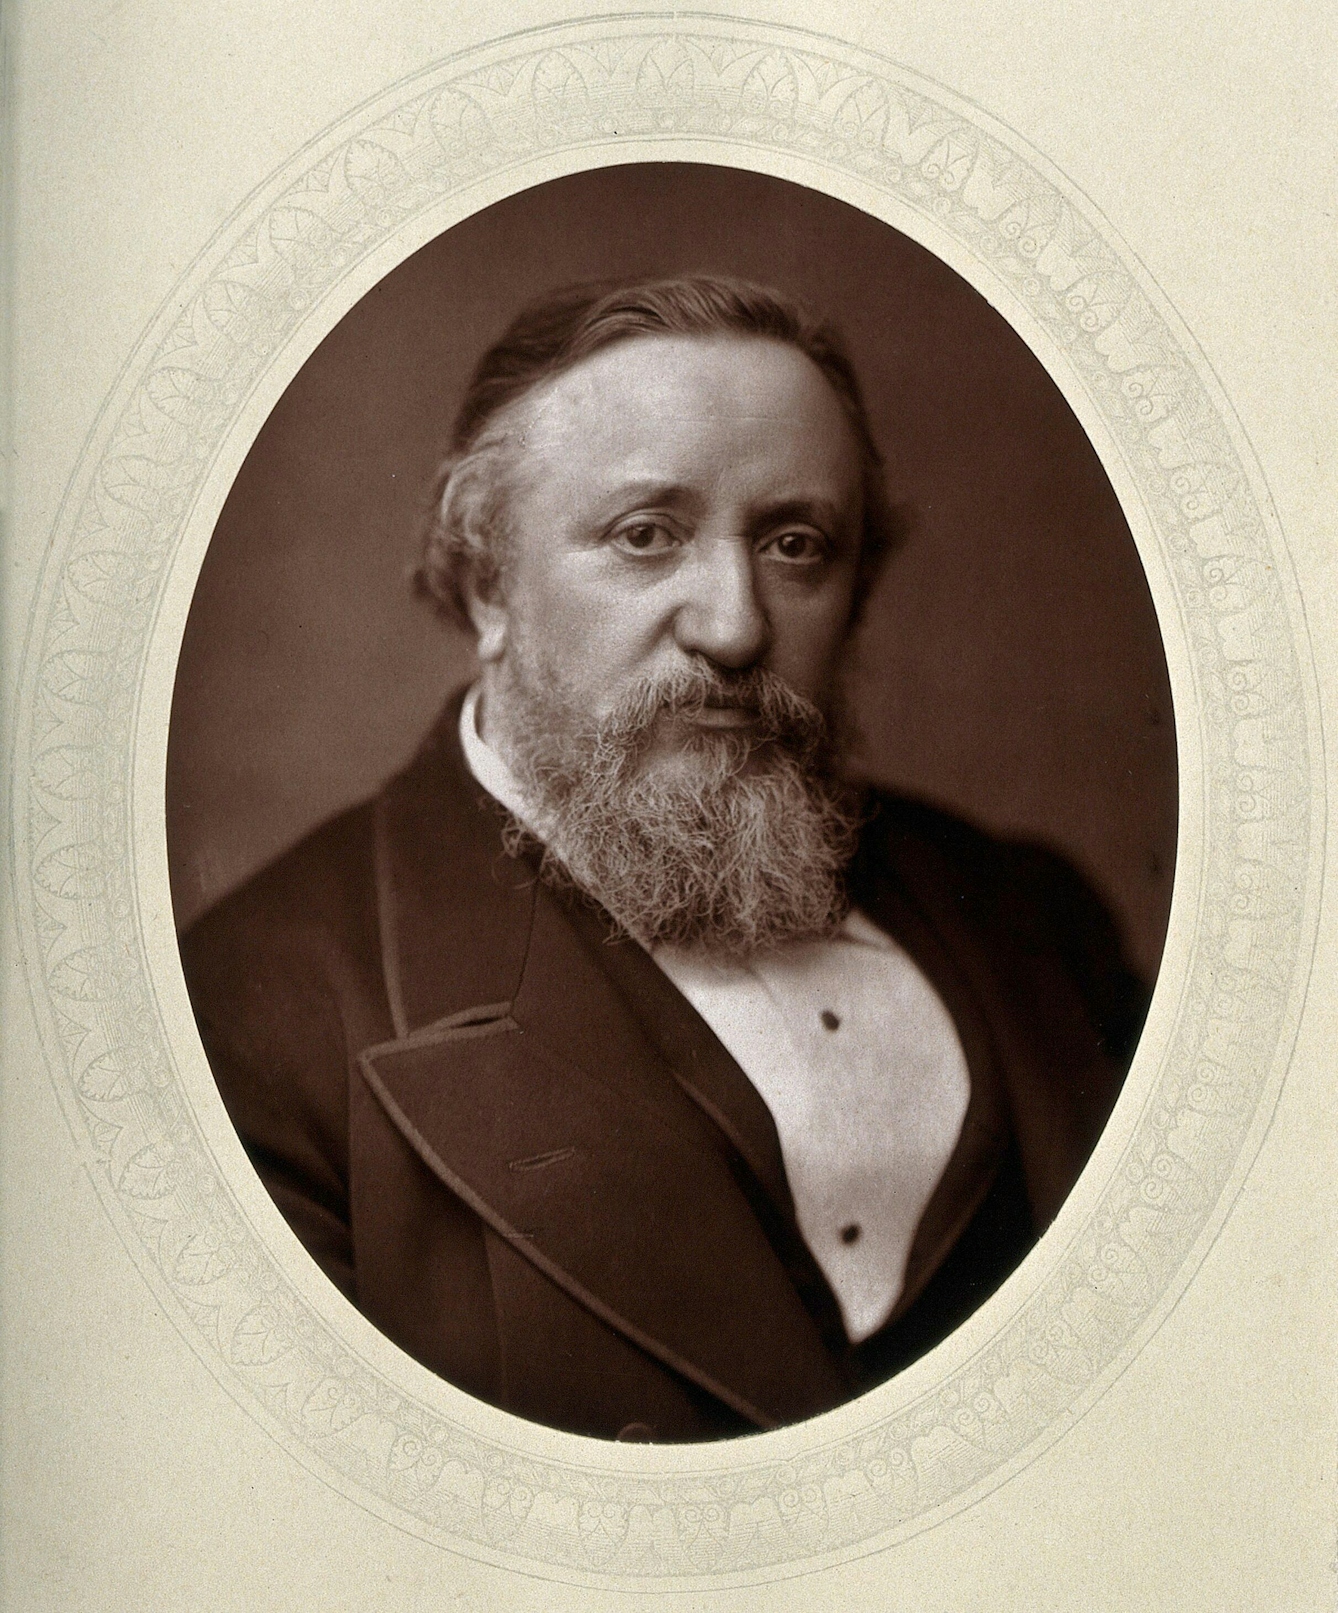 Black and white photographic portrait, showing the head, shoulders and chest of a man, who is looking straight ahead. He has short, greying hair and a beard. He is wearing a black suit jacket with a white shirt.